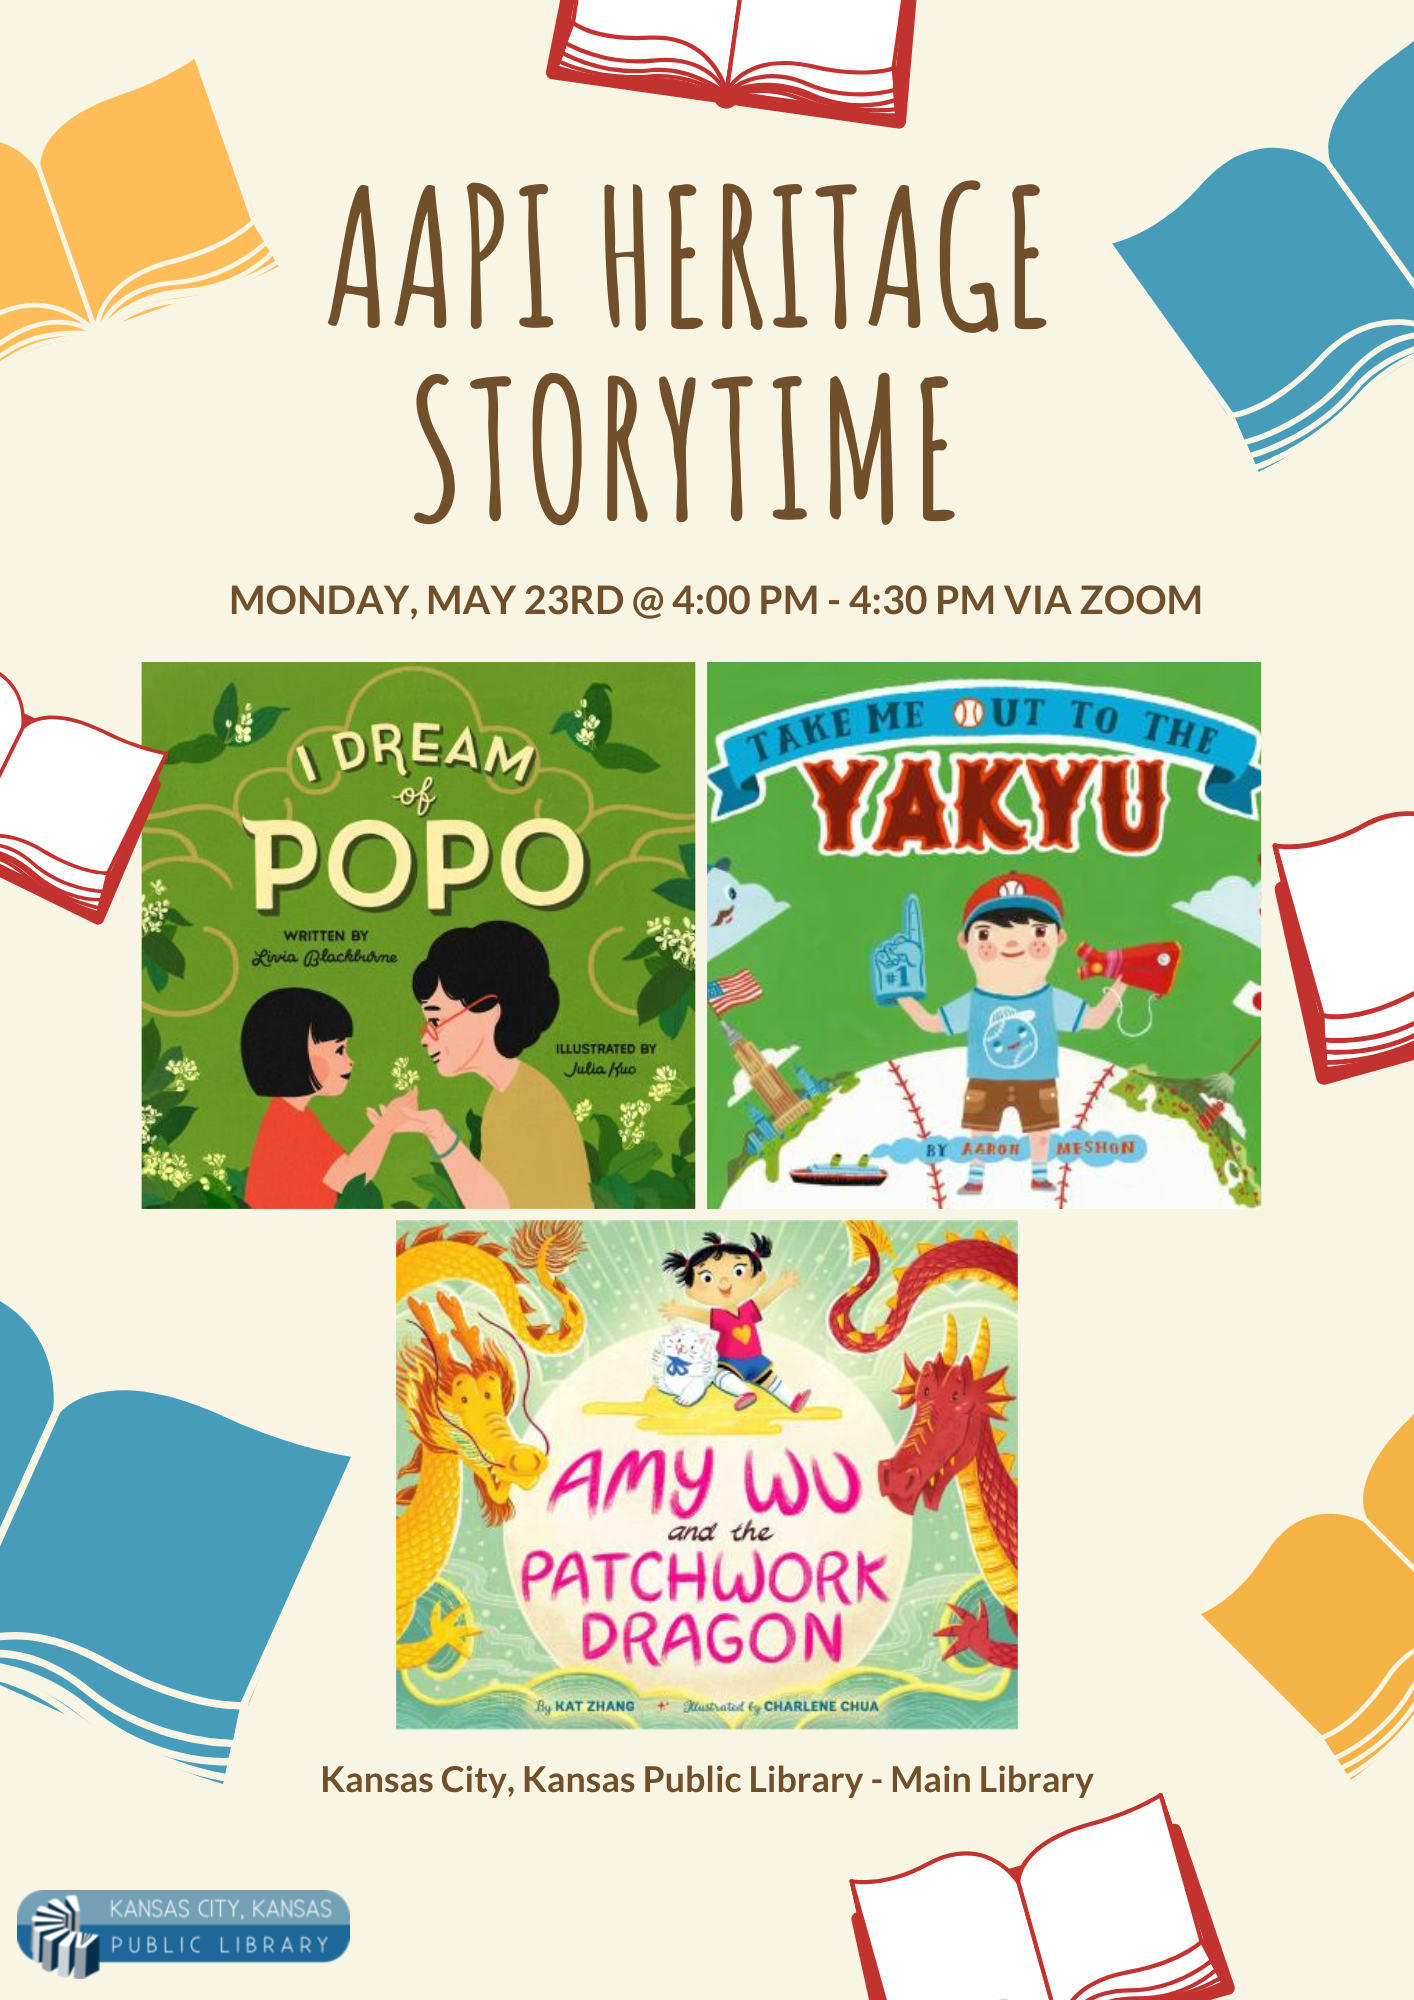 AAPI Heritage Storytime. Books being read include: I Dream of Popo, Take me out to the Yakyu, and Amy Wu and the Patchwork Dragon. 